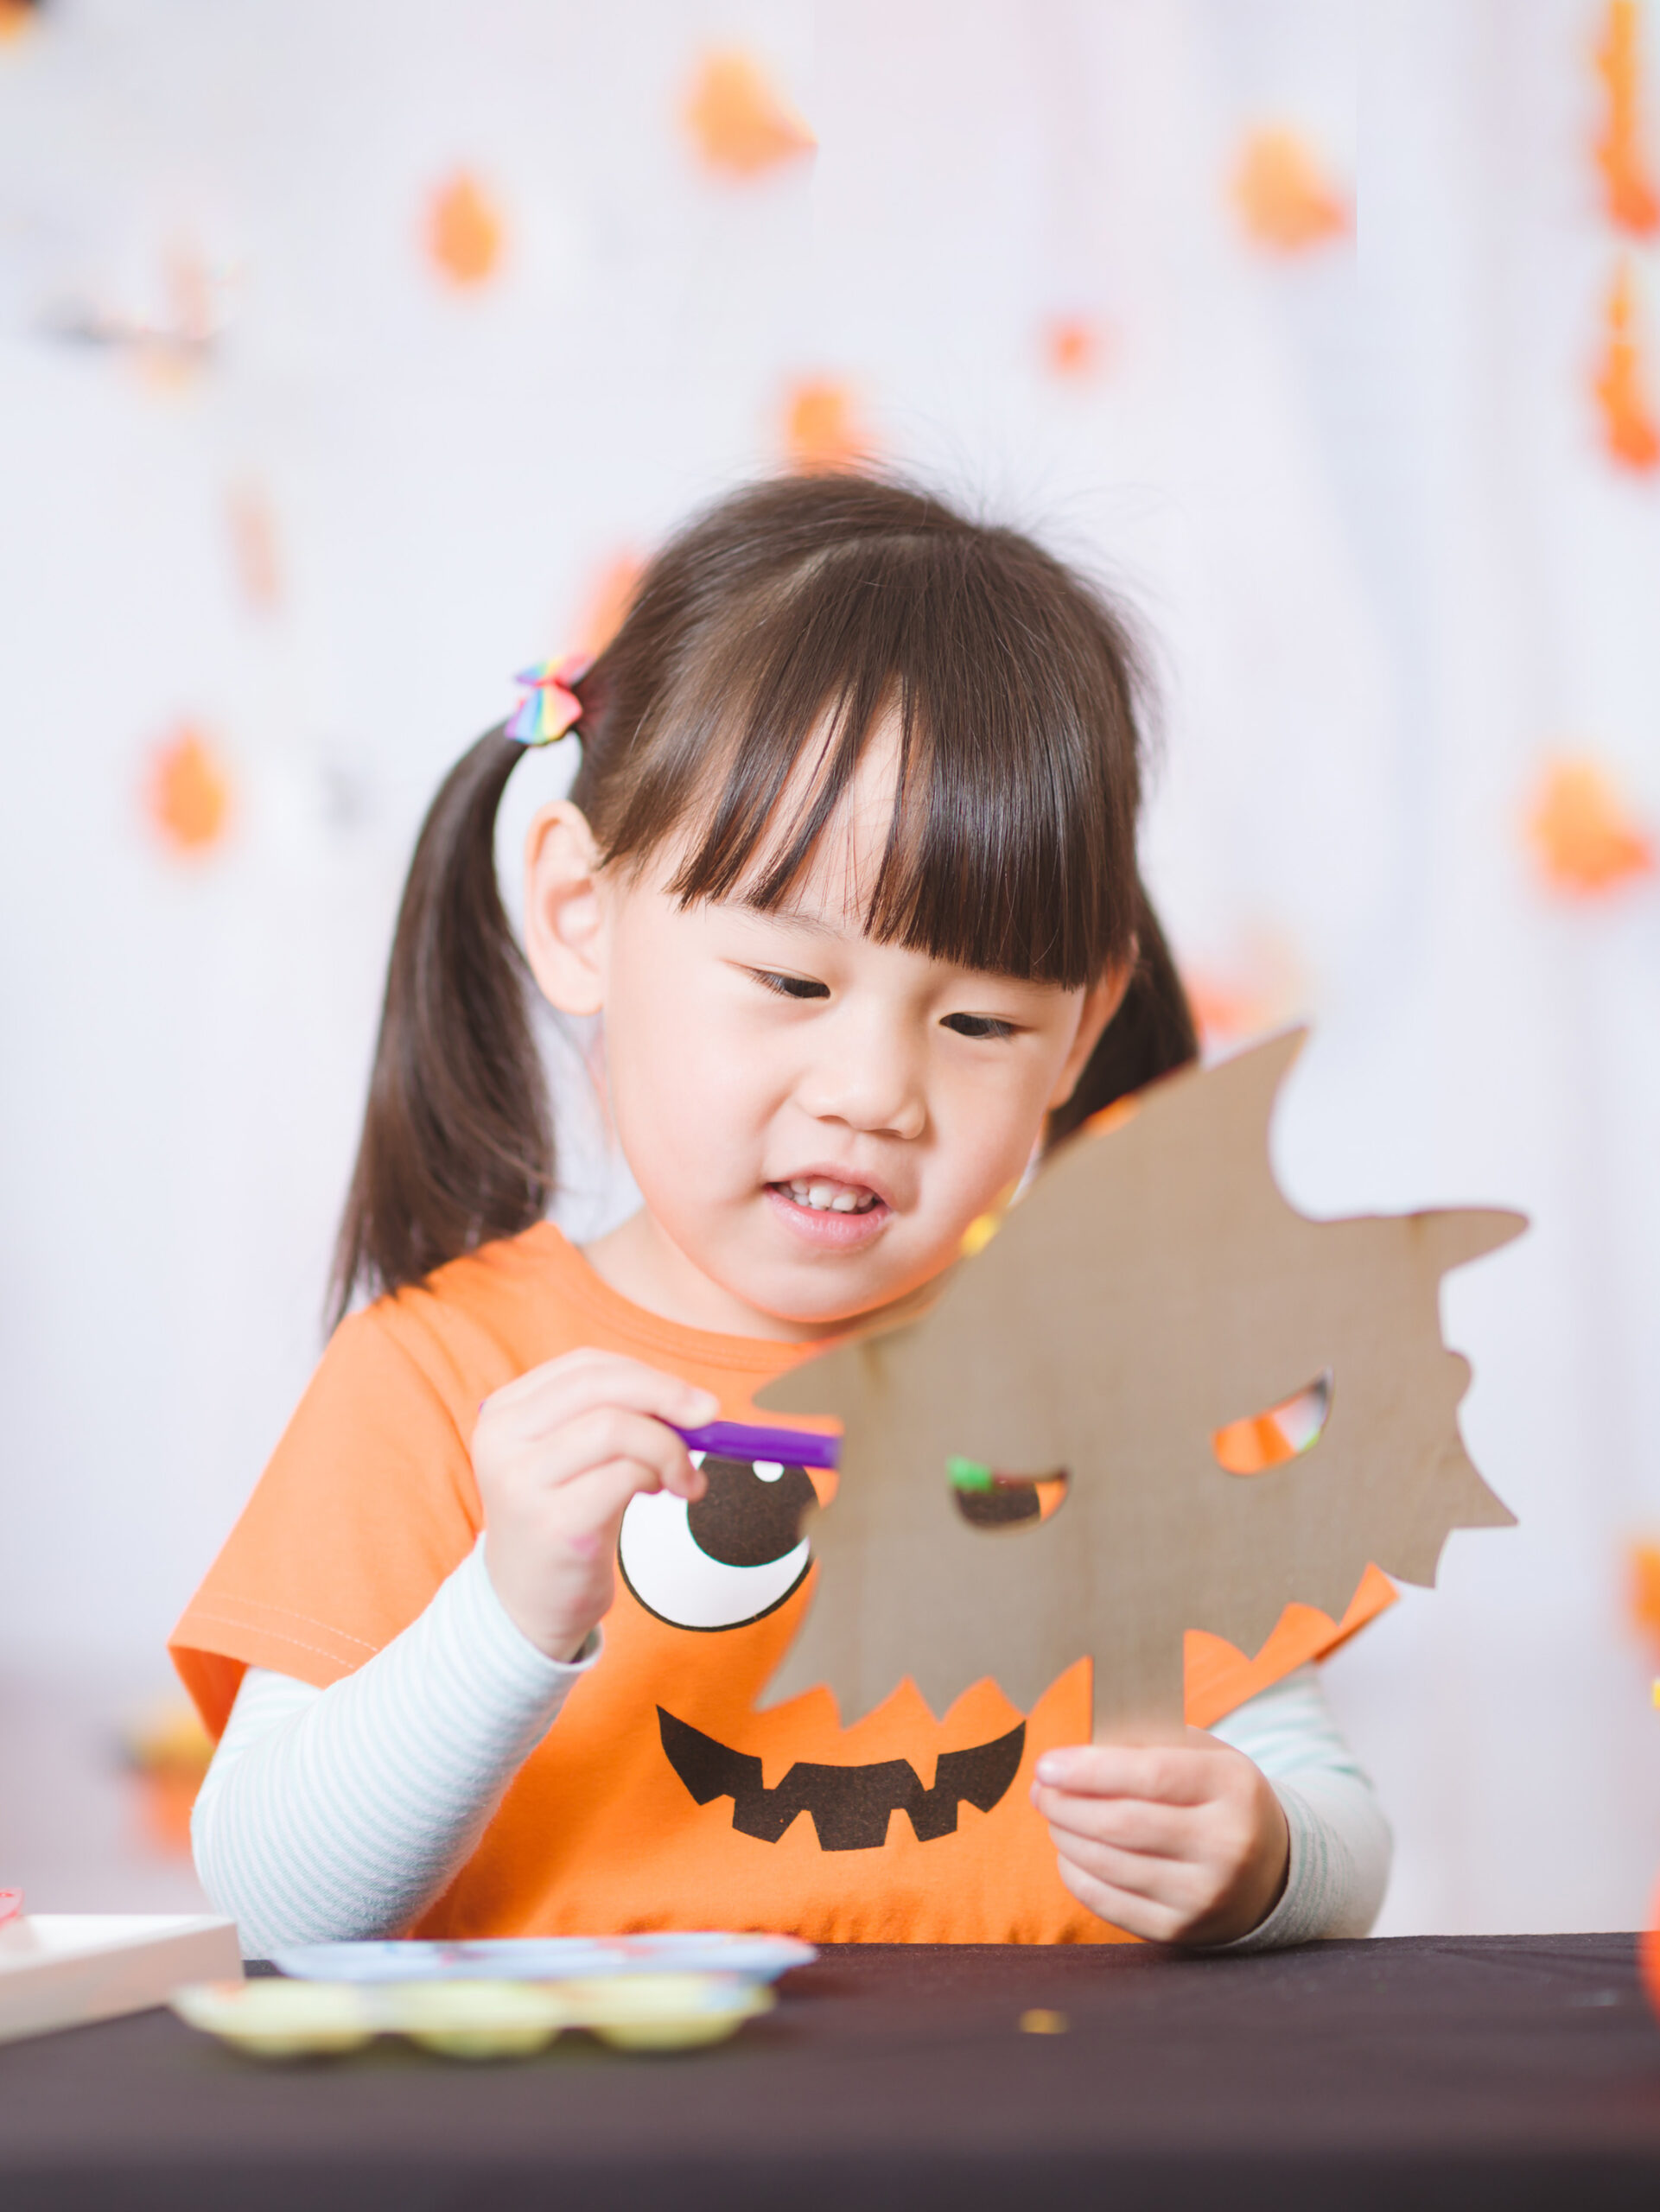 6 ways to calm kids’ nerves about Halloween